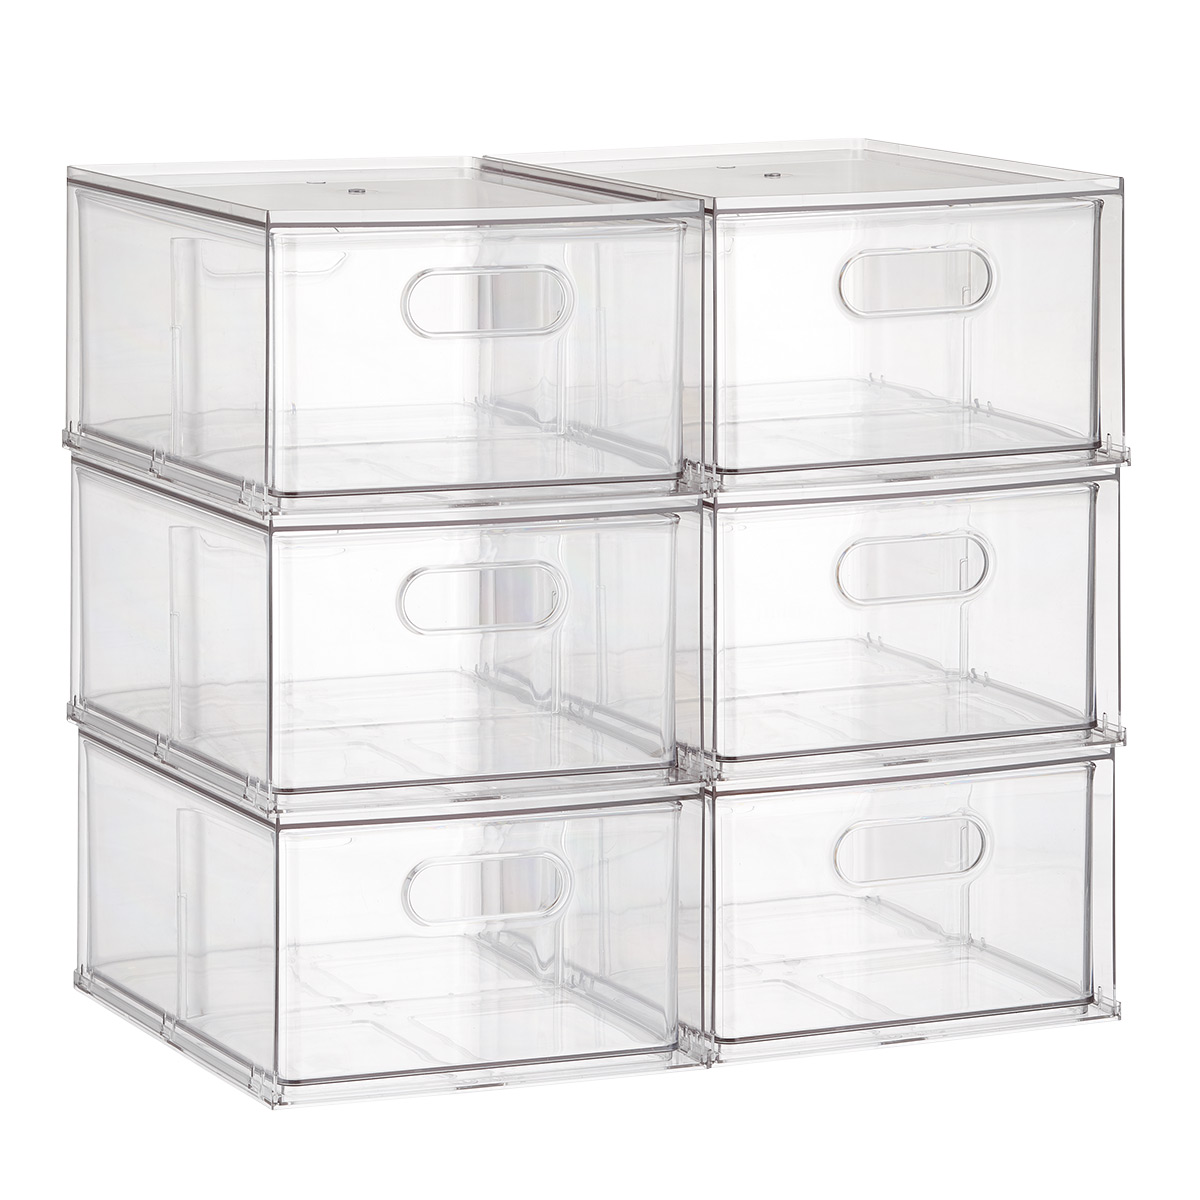 https://www.containerstore.com/catalogimages/406645/10082467-The-Home-Edit-stackable-dra.jpg